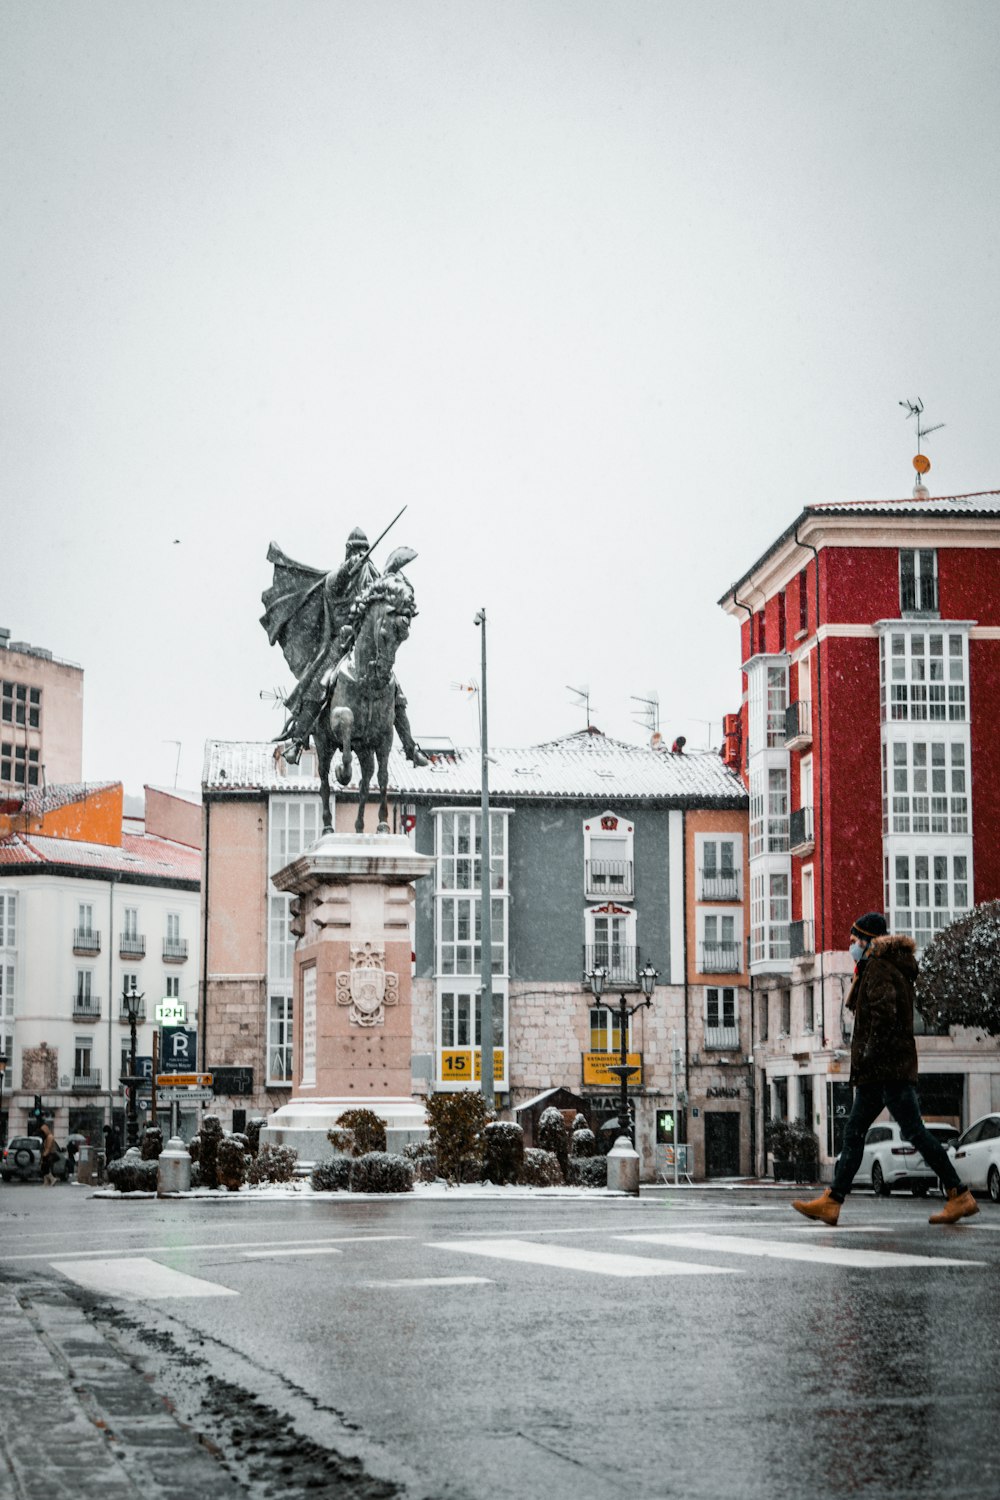 a statue of a man riding a horse on a city street